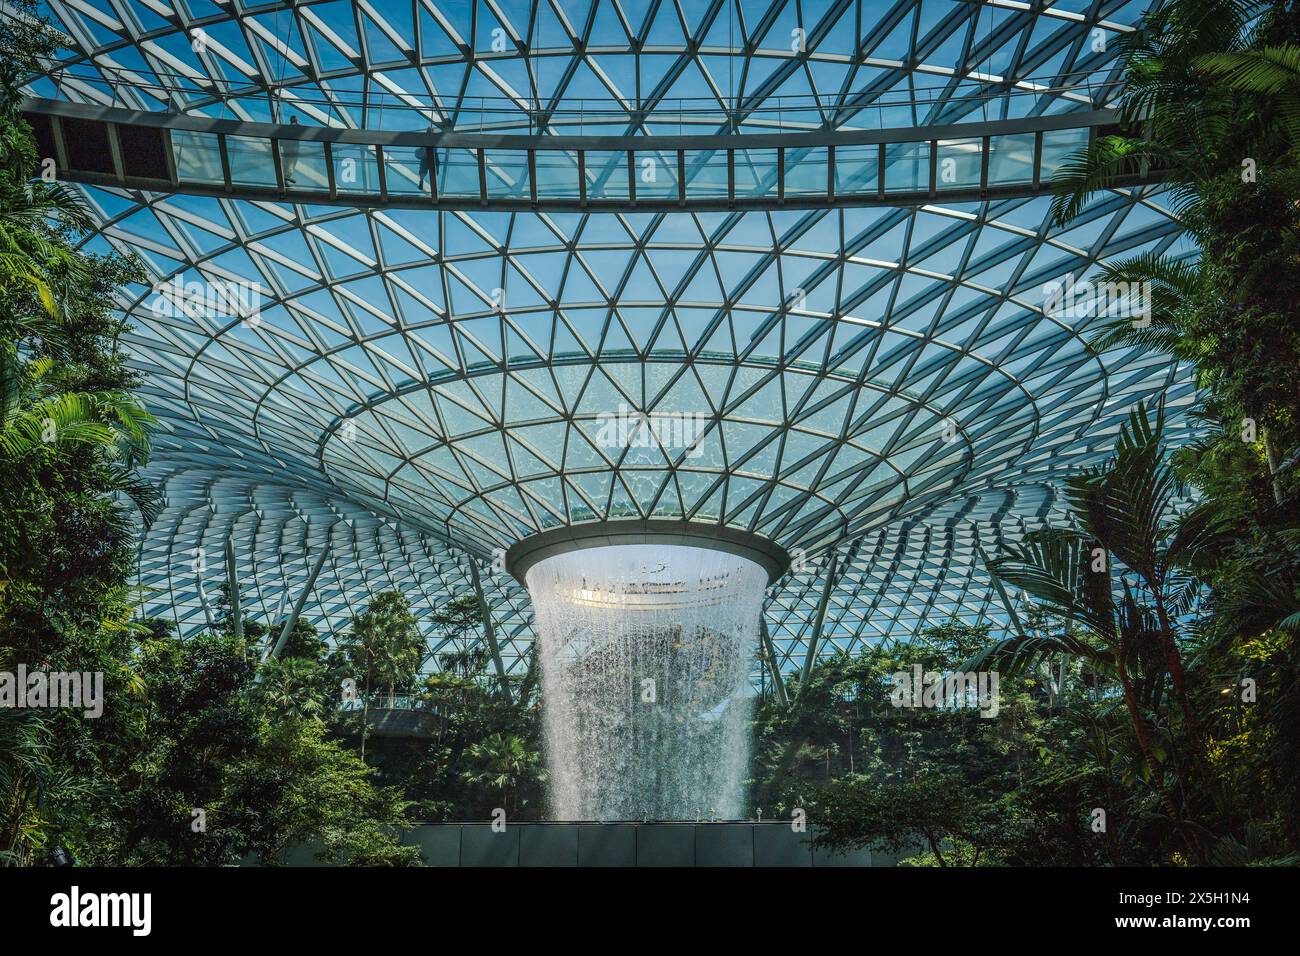 This image features a stunning indoor waterfall surrounded by lush tropical plants inside a large glass dome, showcasing architectural innovation and Stock Photo